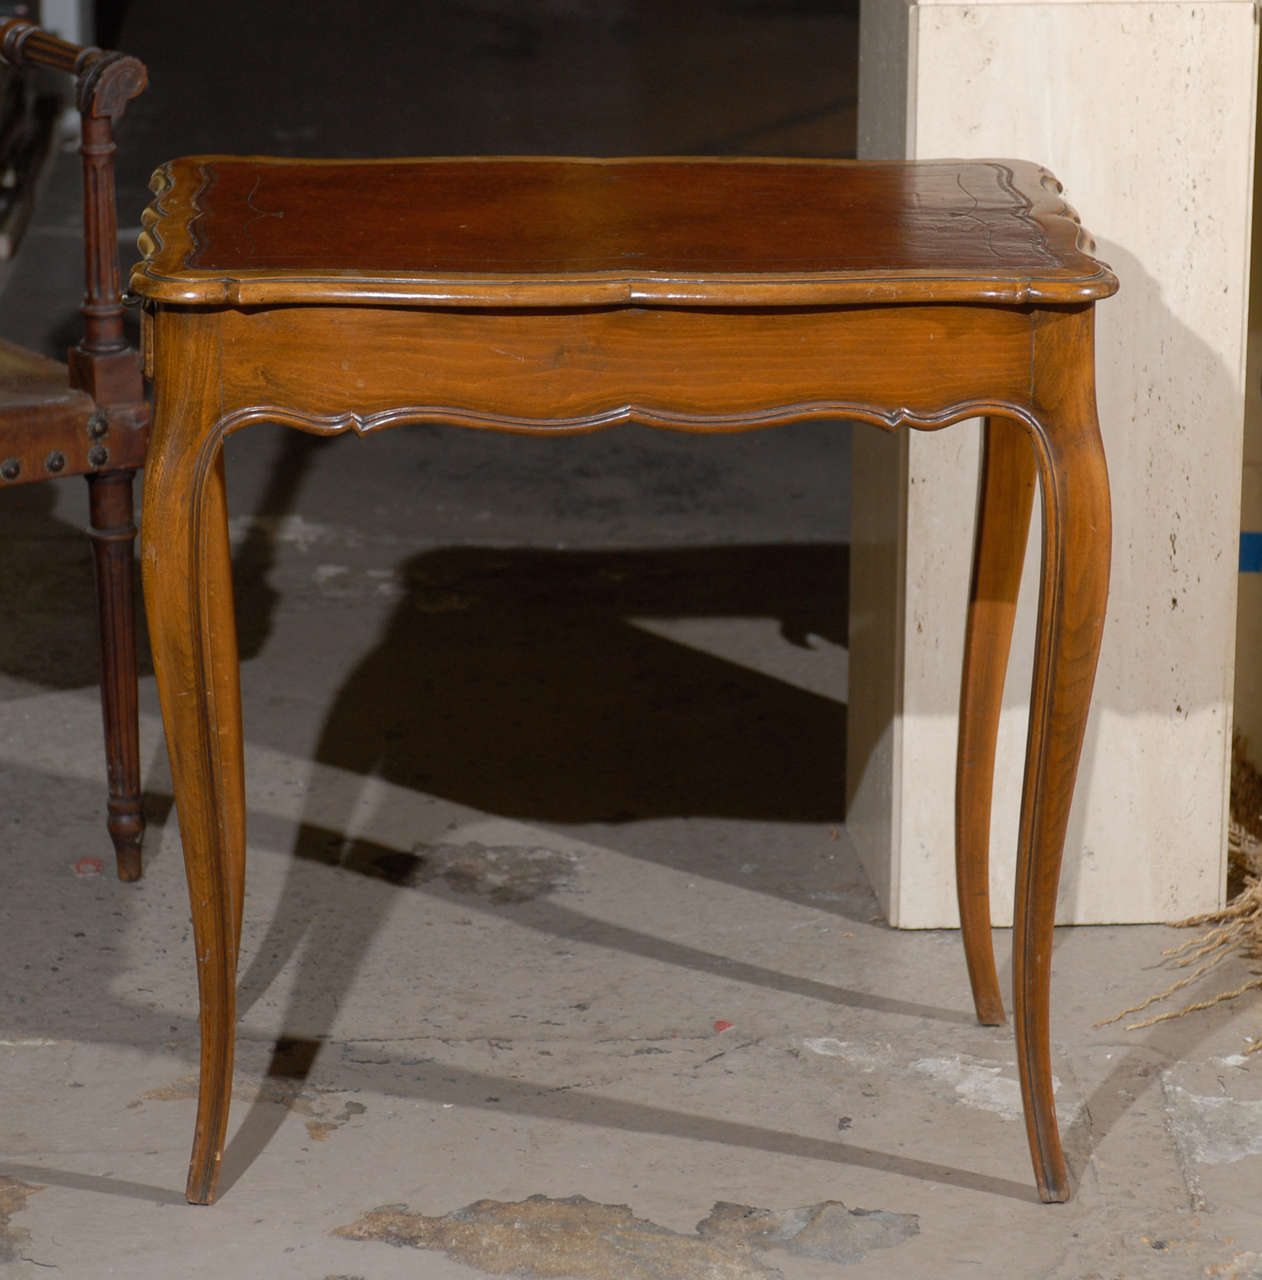 20th century French Louis XV style side table of walnut featuring a scalloped ogee edge top with a brown embossed leather inset.  The table holds one drawer, has a scalloped apron, and rests on cabriole legs.  Great condition.